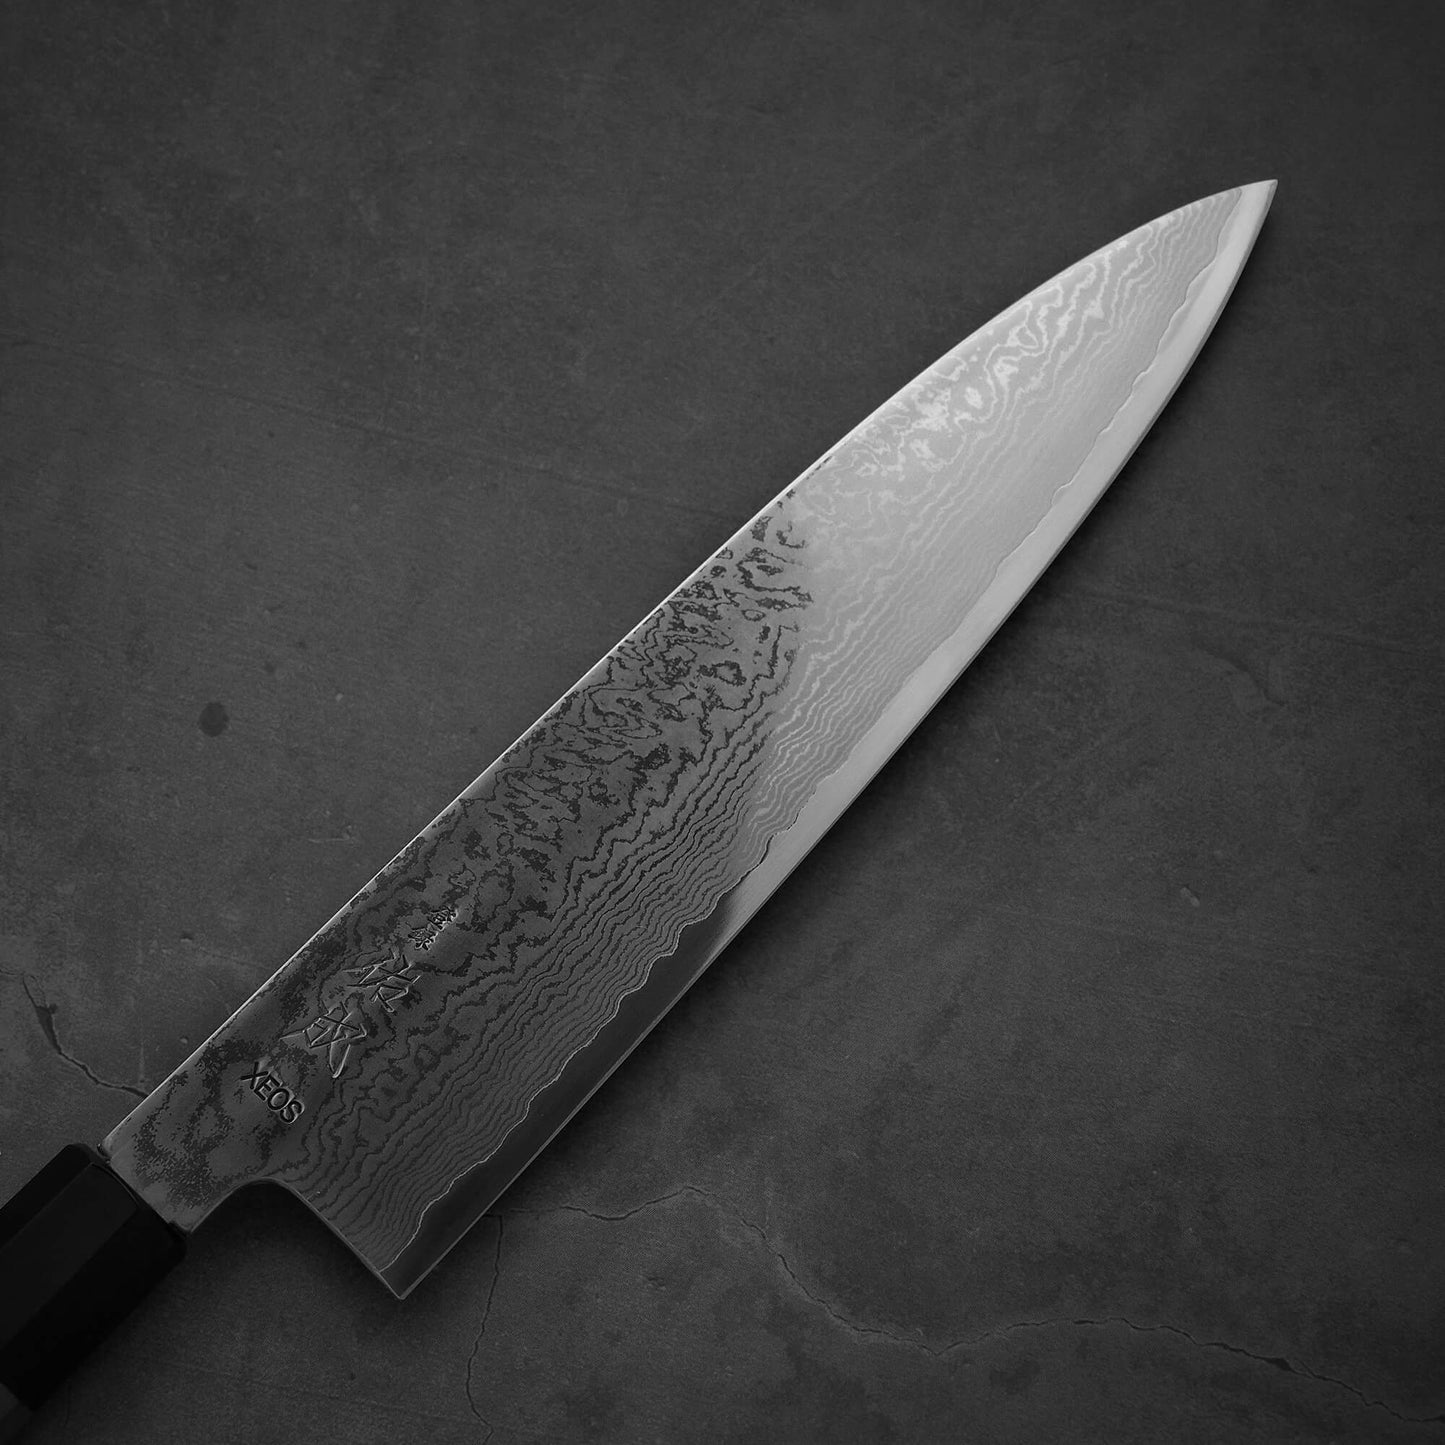 Close up view of the blade of Sukenari damascus XEOS gyuto. Image shows the right side of the blade